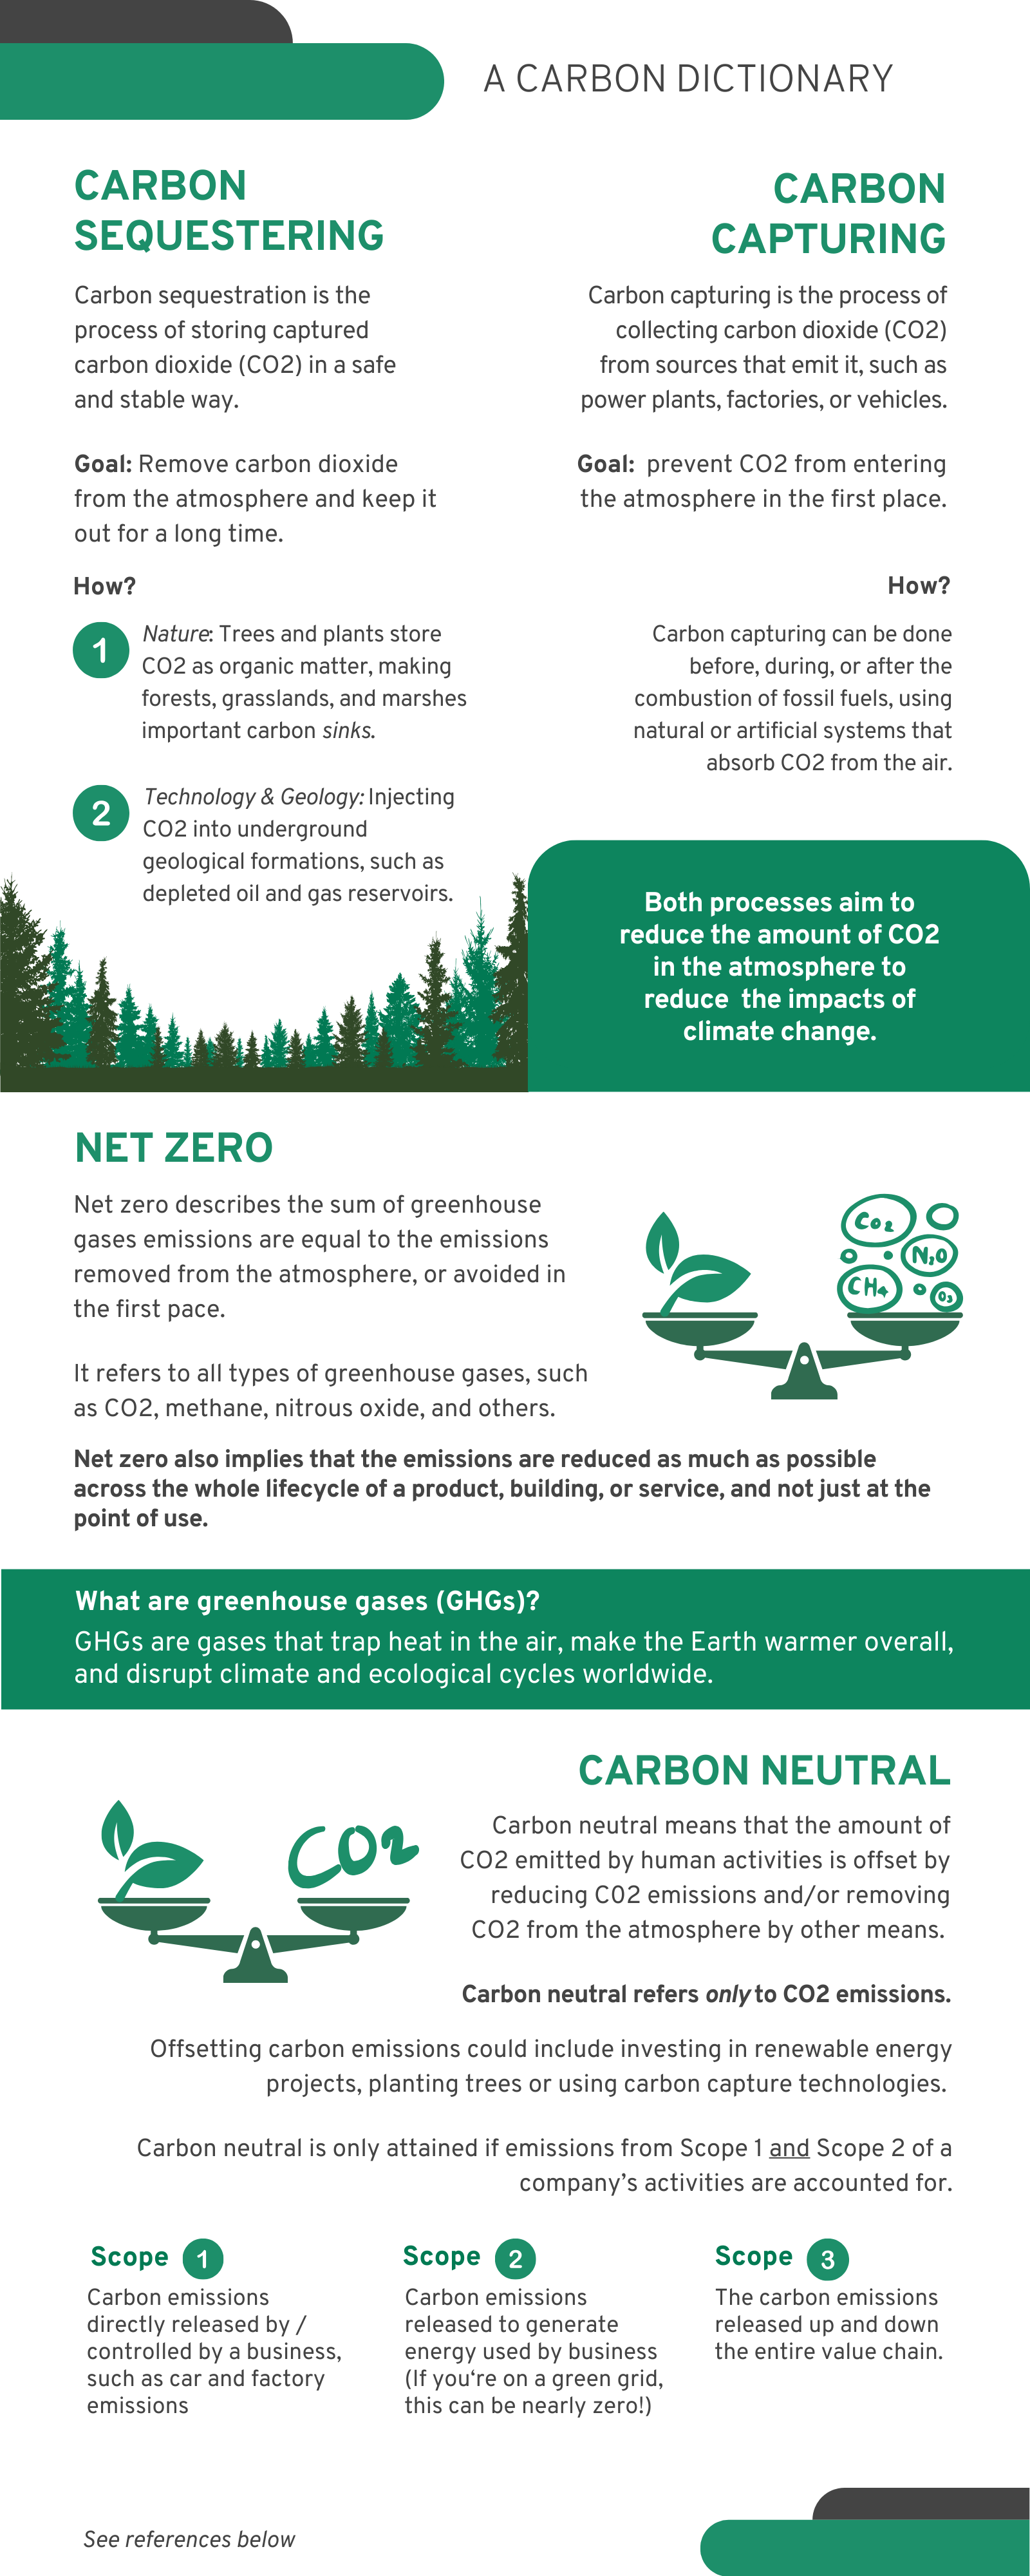 What is Carbon Sequestering, Carbon Capturing and Carbon Neutral?